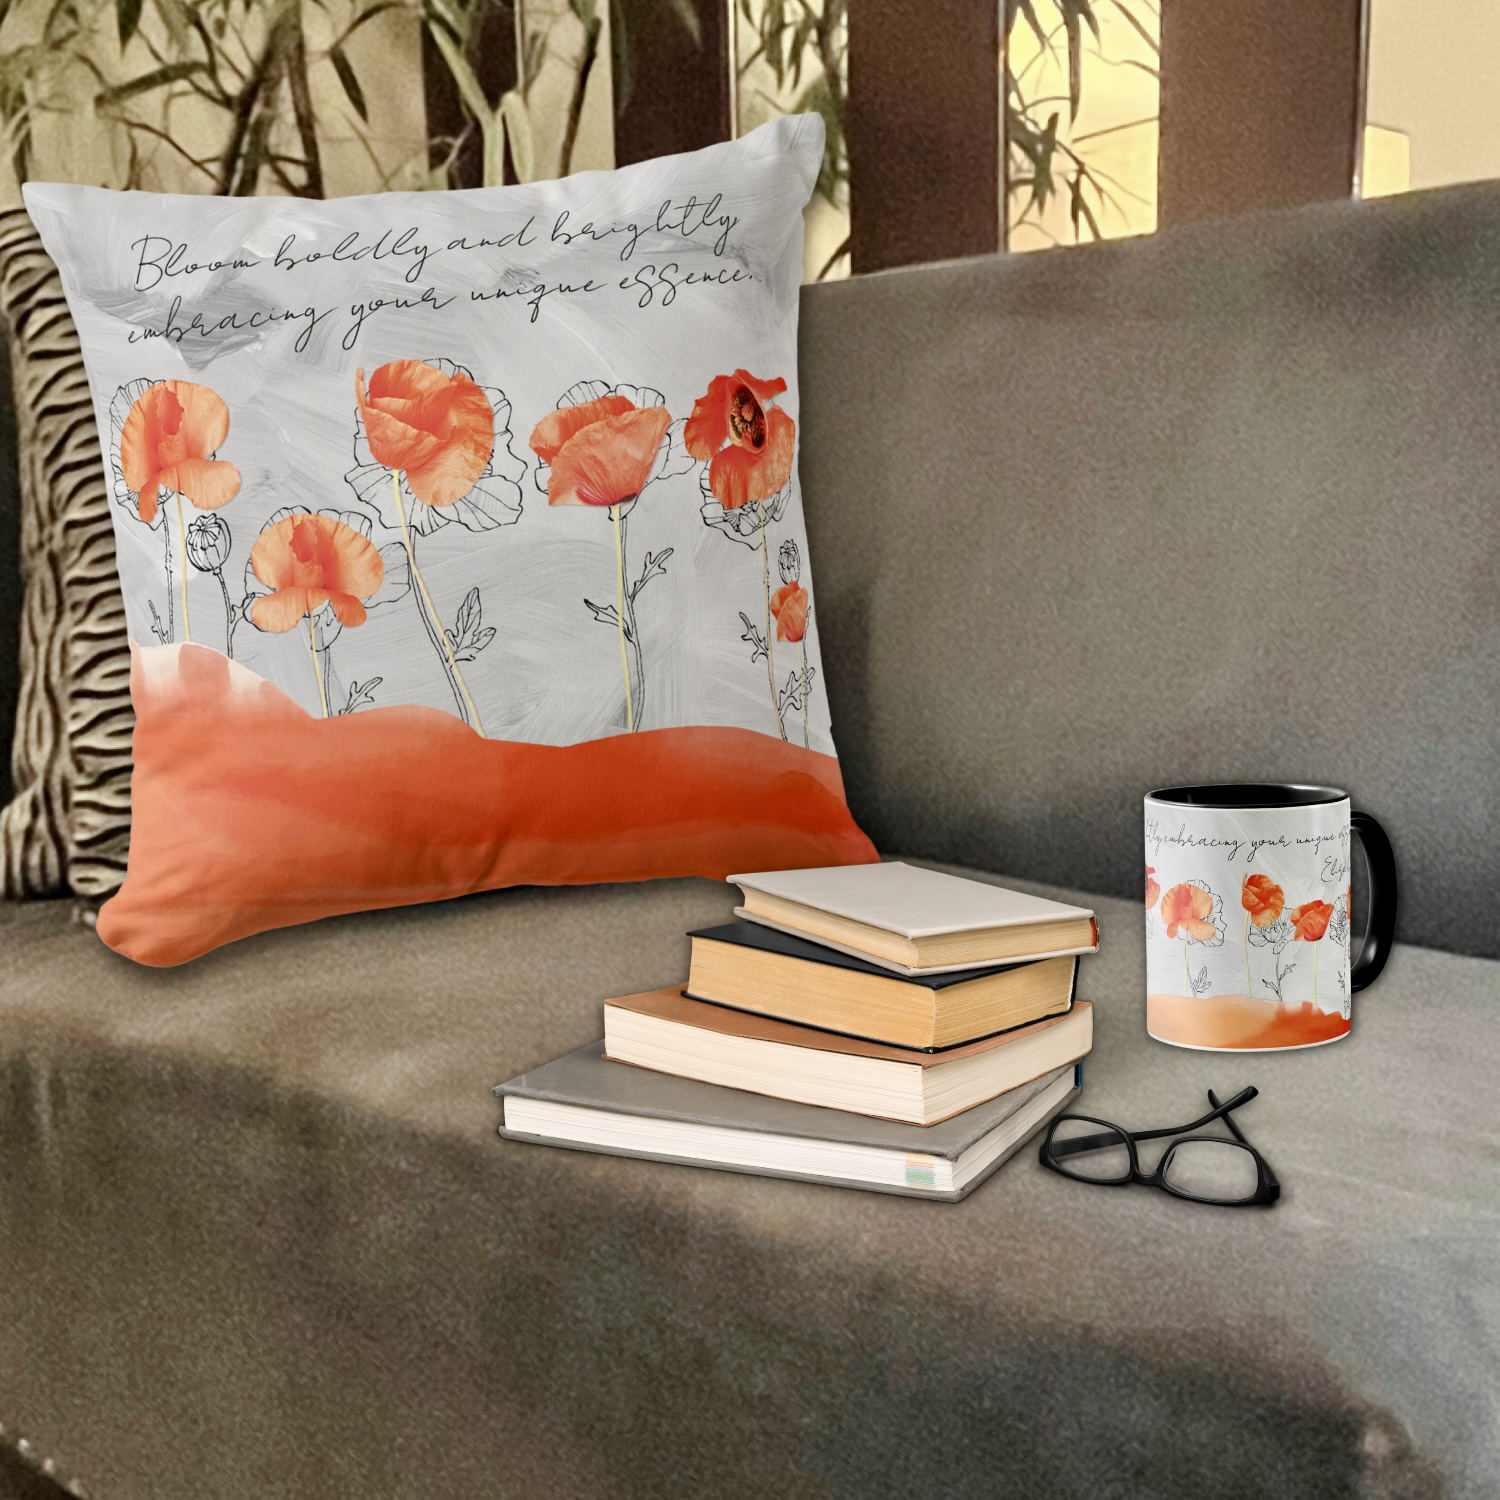 Peach color flowers matching mug and pillow. Both with space for customizable message and name.